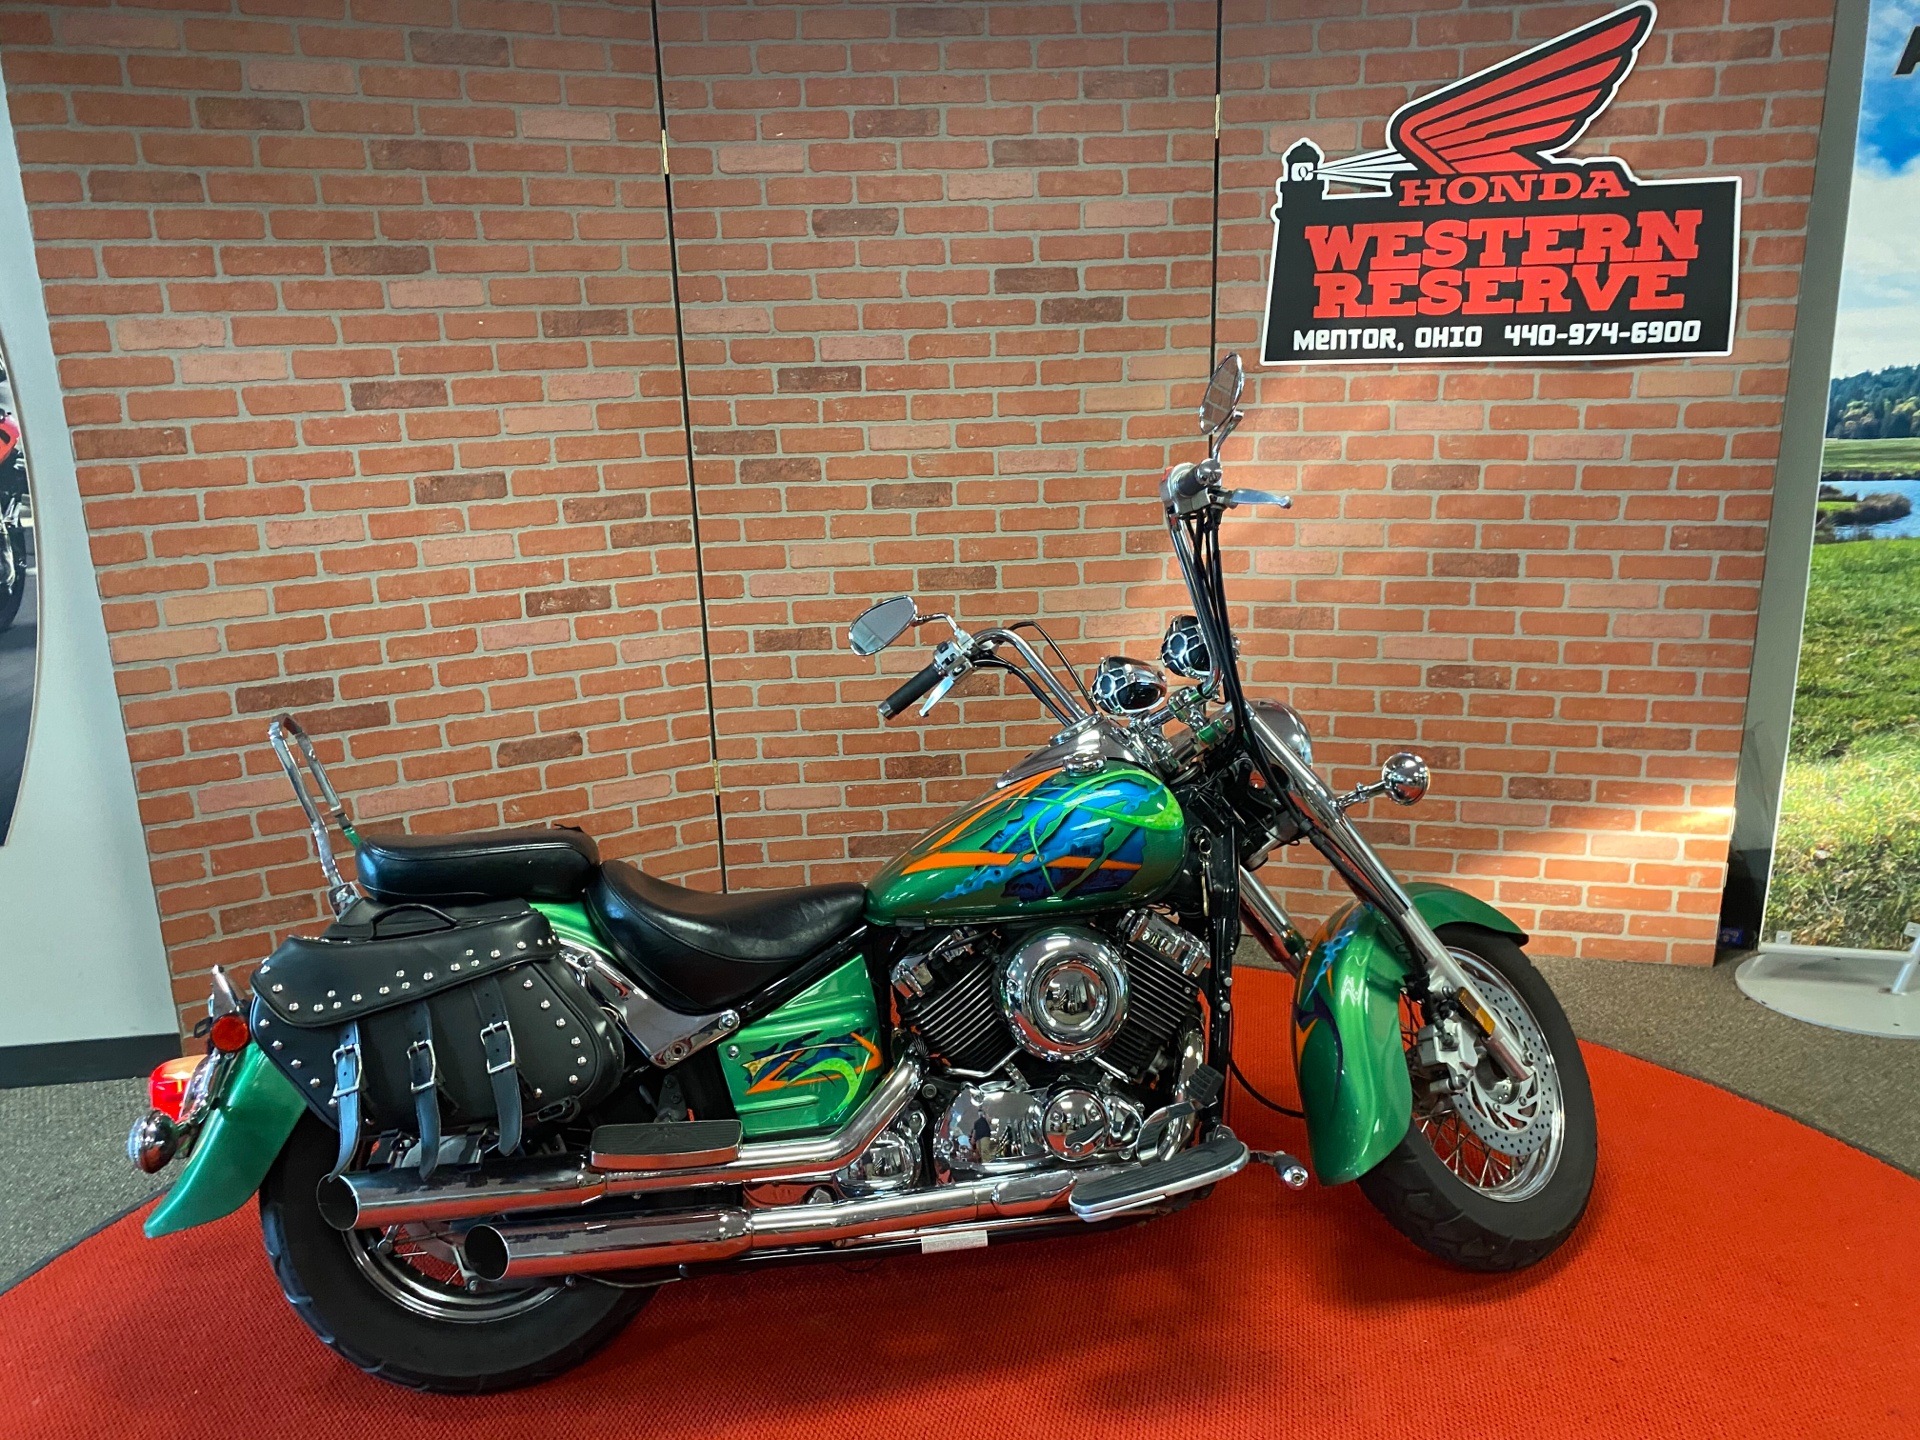 Used 2006 Yamaha V Star 650 Lime Green Motorcycles In Mentor Oh N A